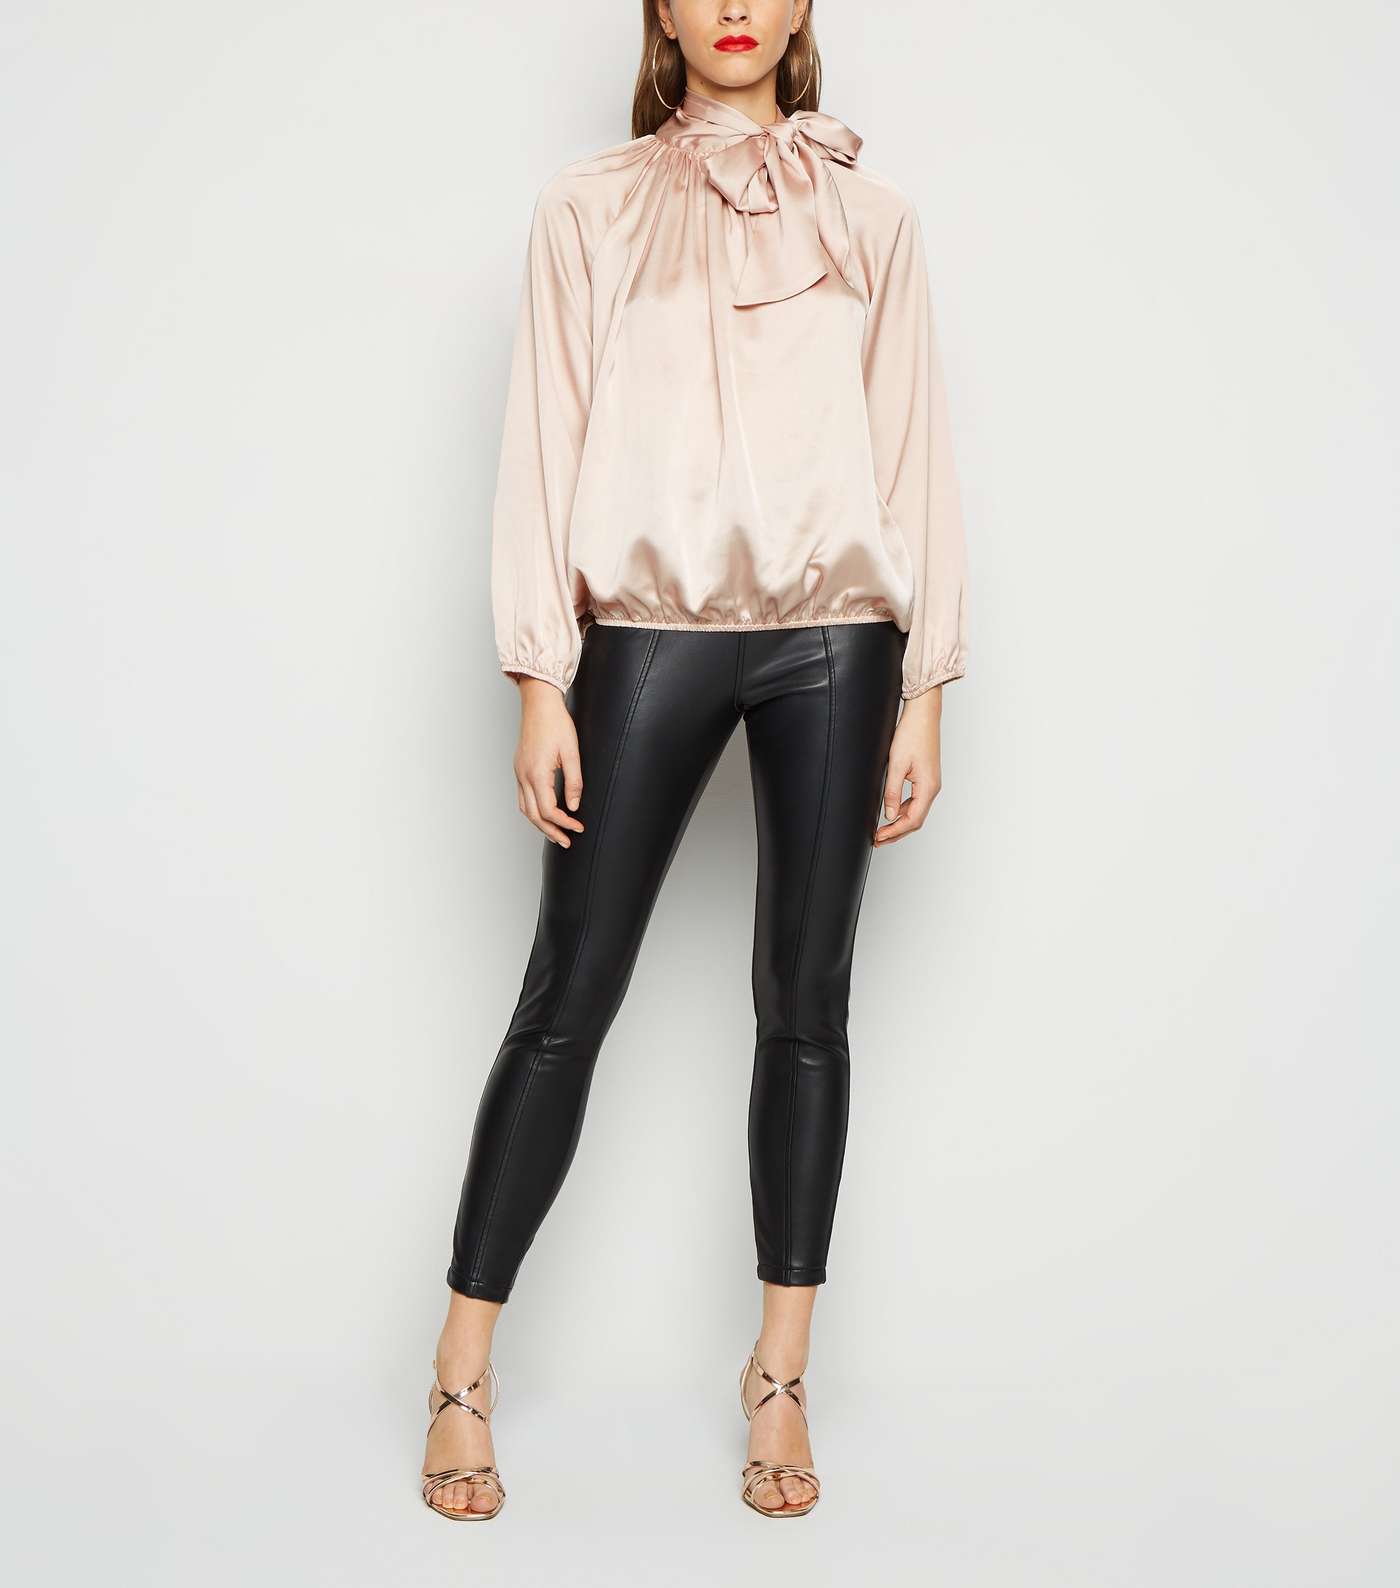 Cameo Rose Pale Pink Satin Tie Neck Blouse Image 2